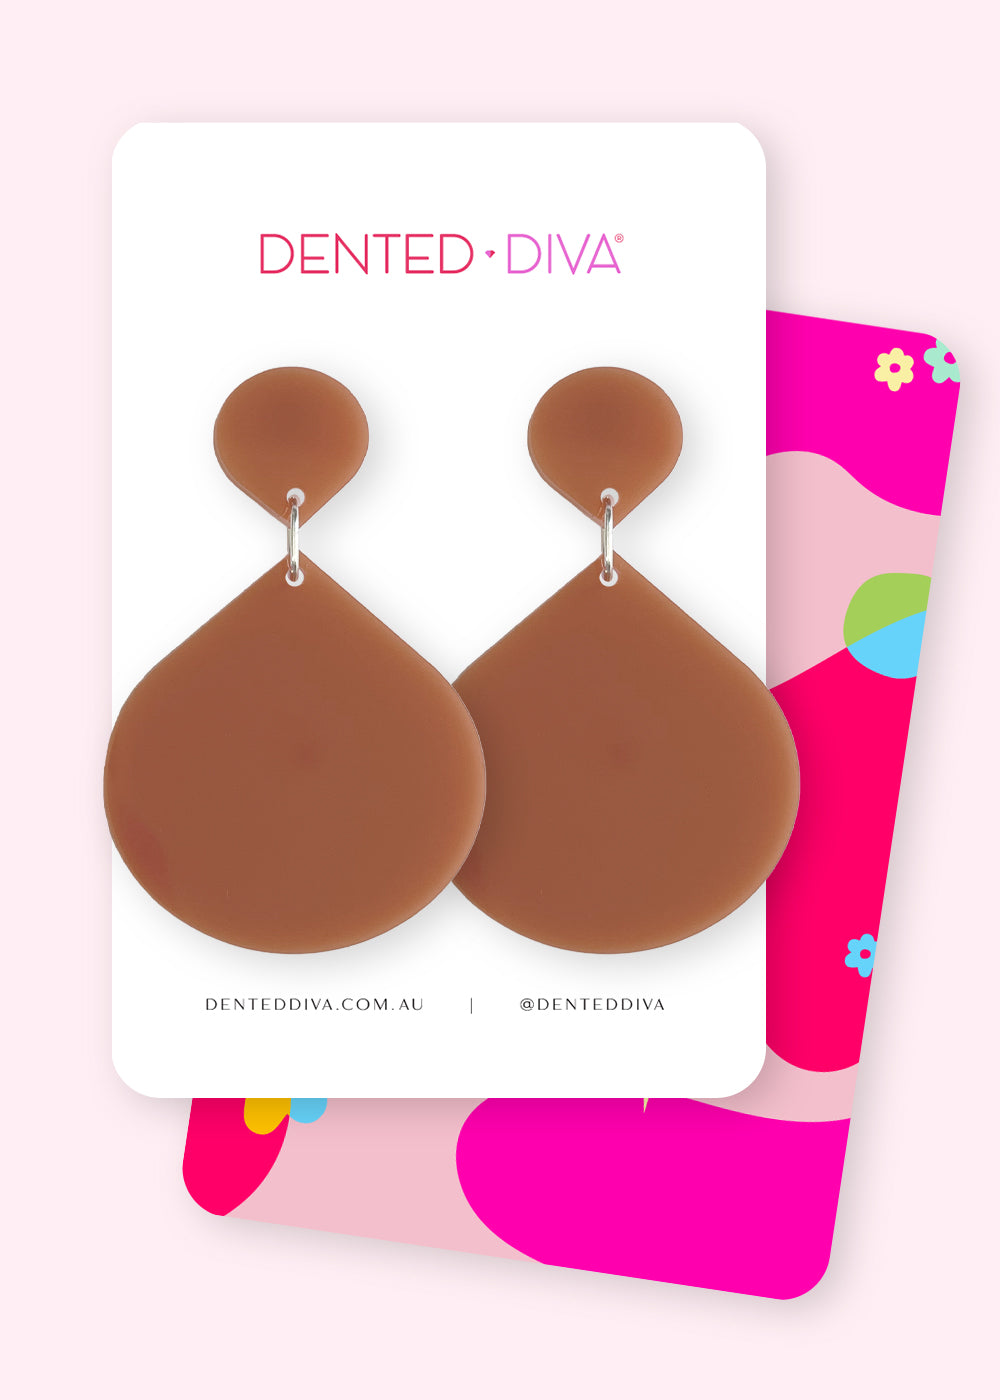 Mystery Subscription Box 1 PRE ORDER - Dented Diva